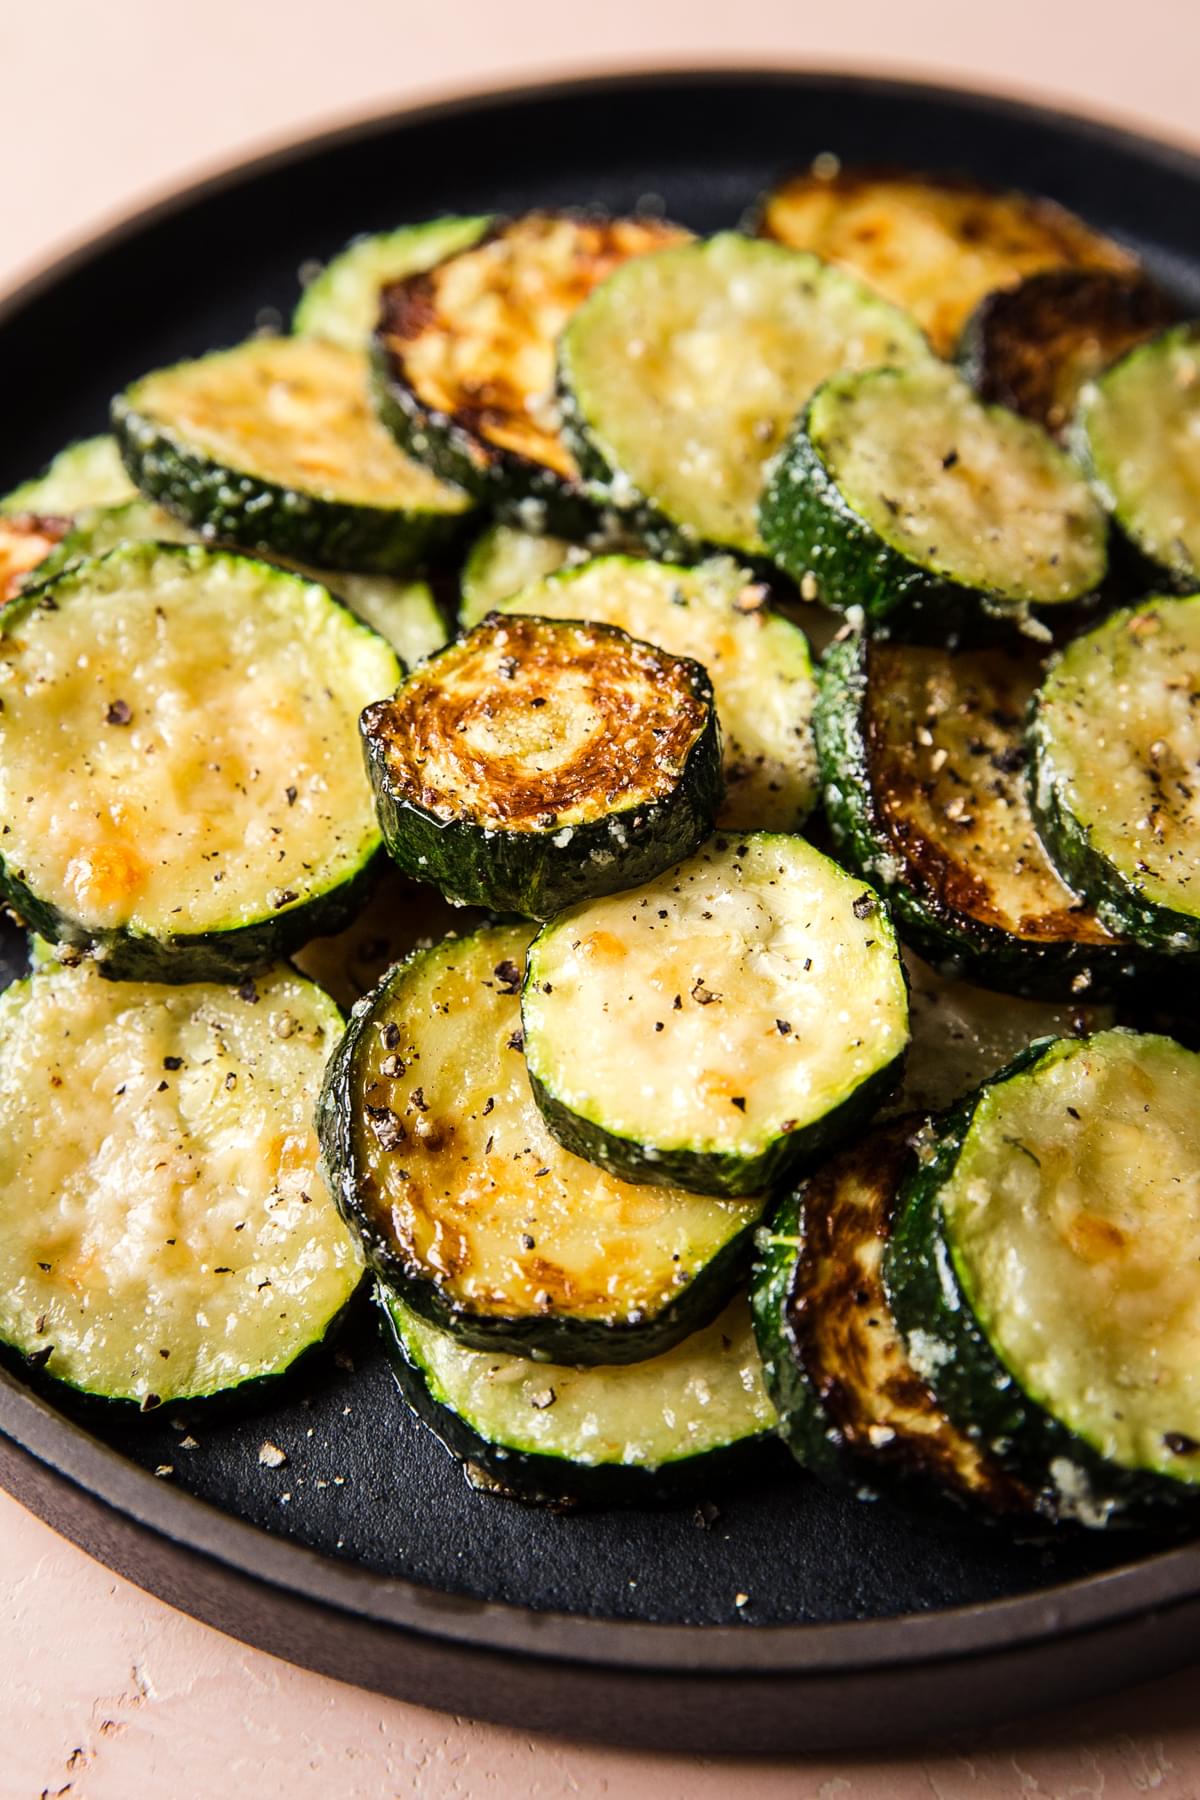 Roasted Zucchini with Parmesan